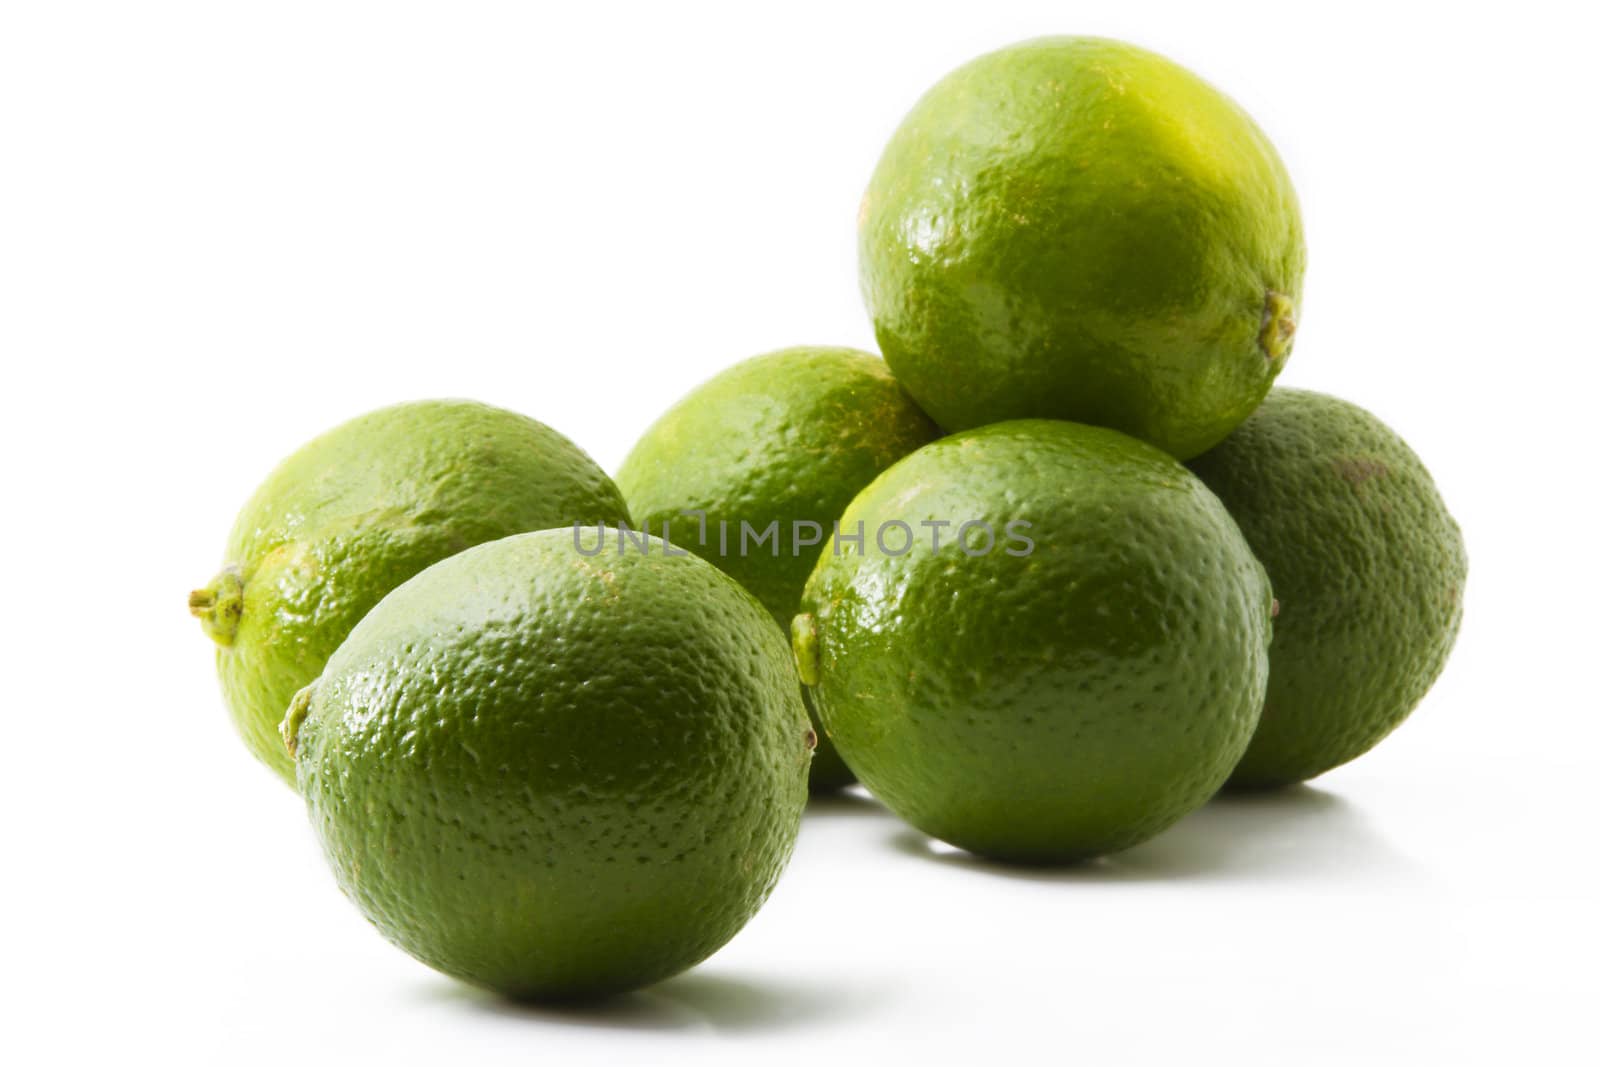 six limes by RobStark